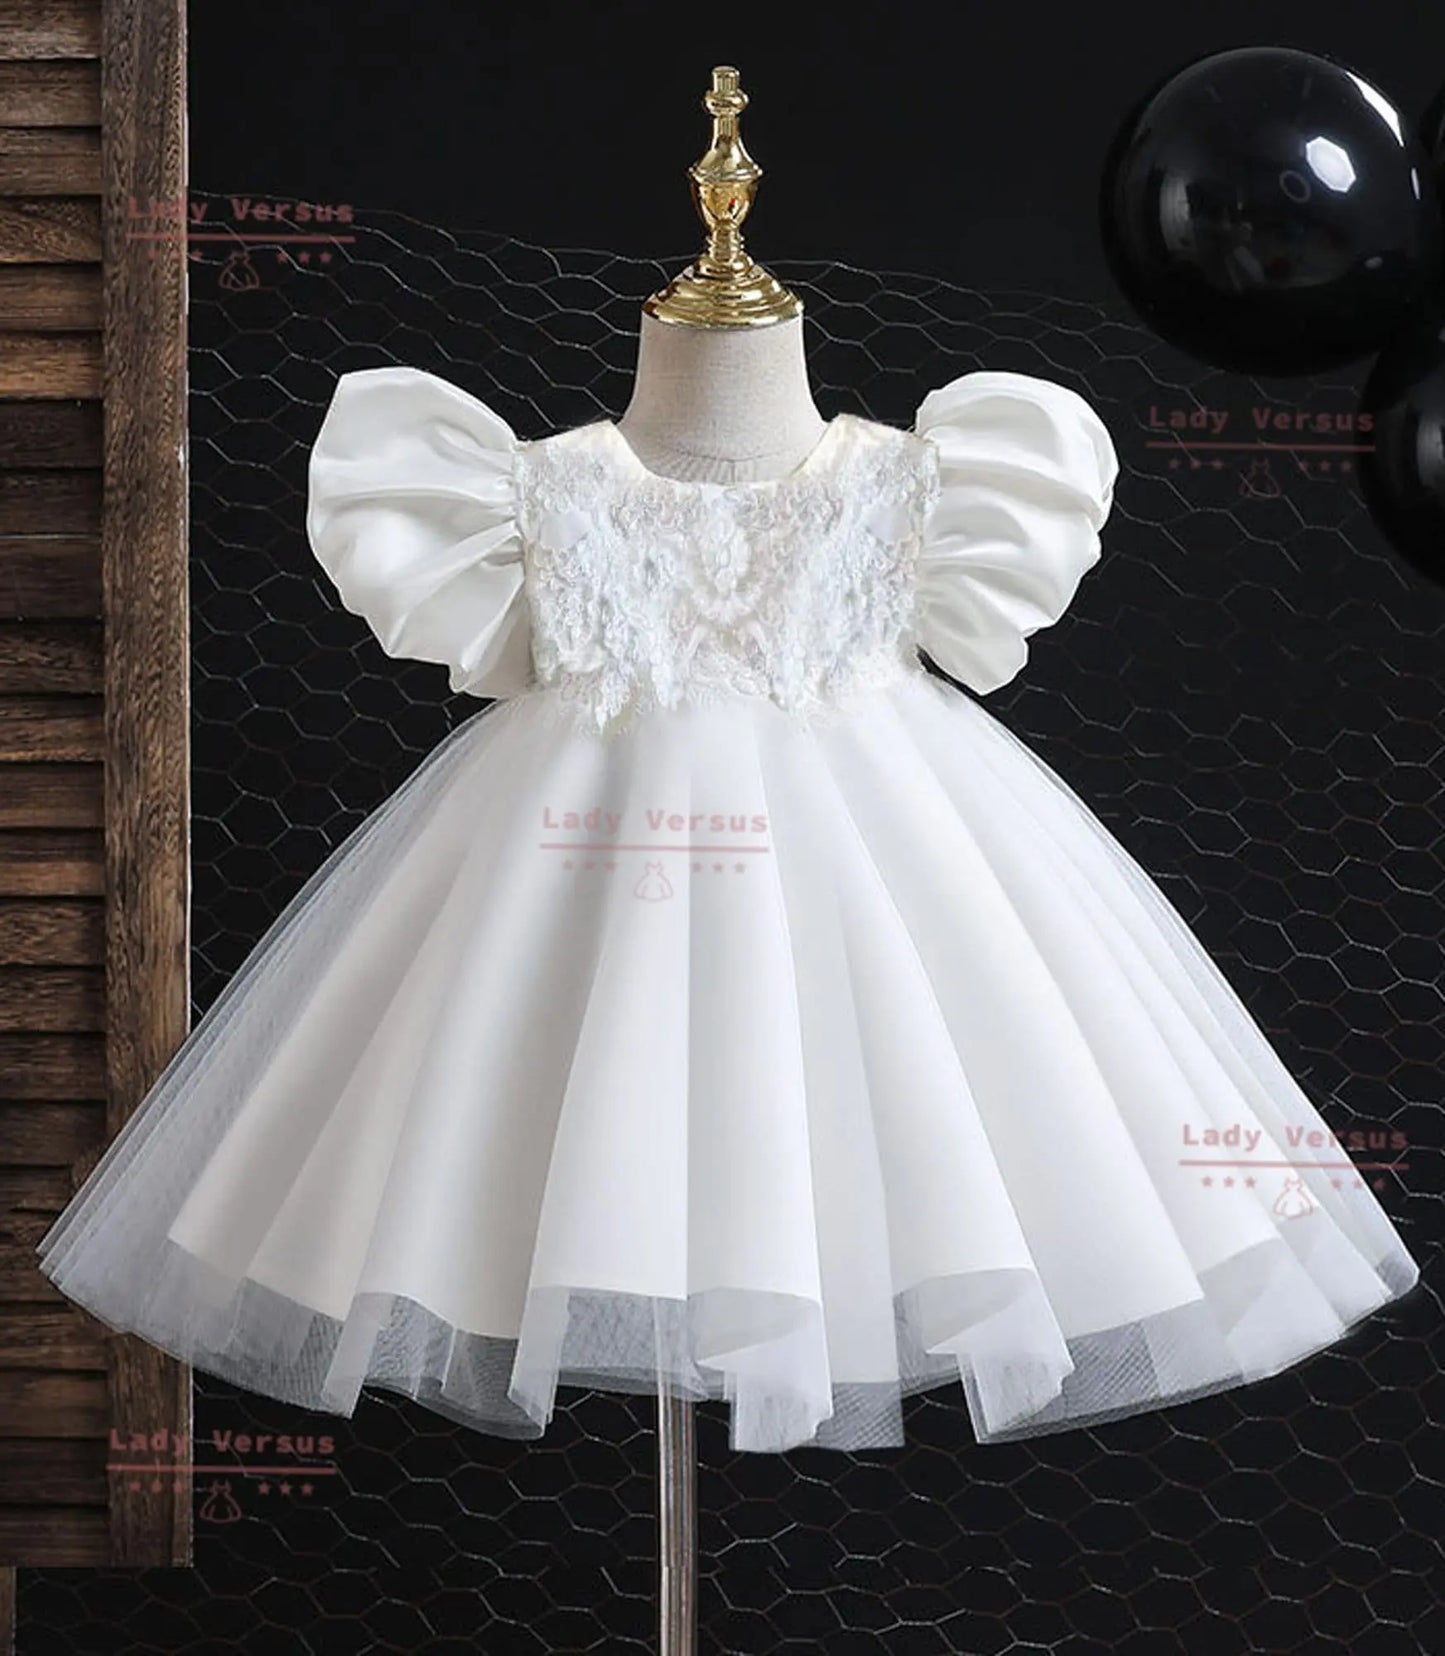 White Baby Girl Baptism Dress  | Baby Girl Christening Gown | Baby Girl Baptism Outfit | birthday princess gown / toddler white dress Lady Versus